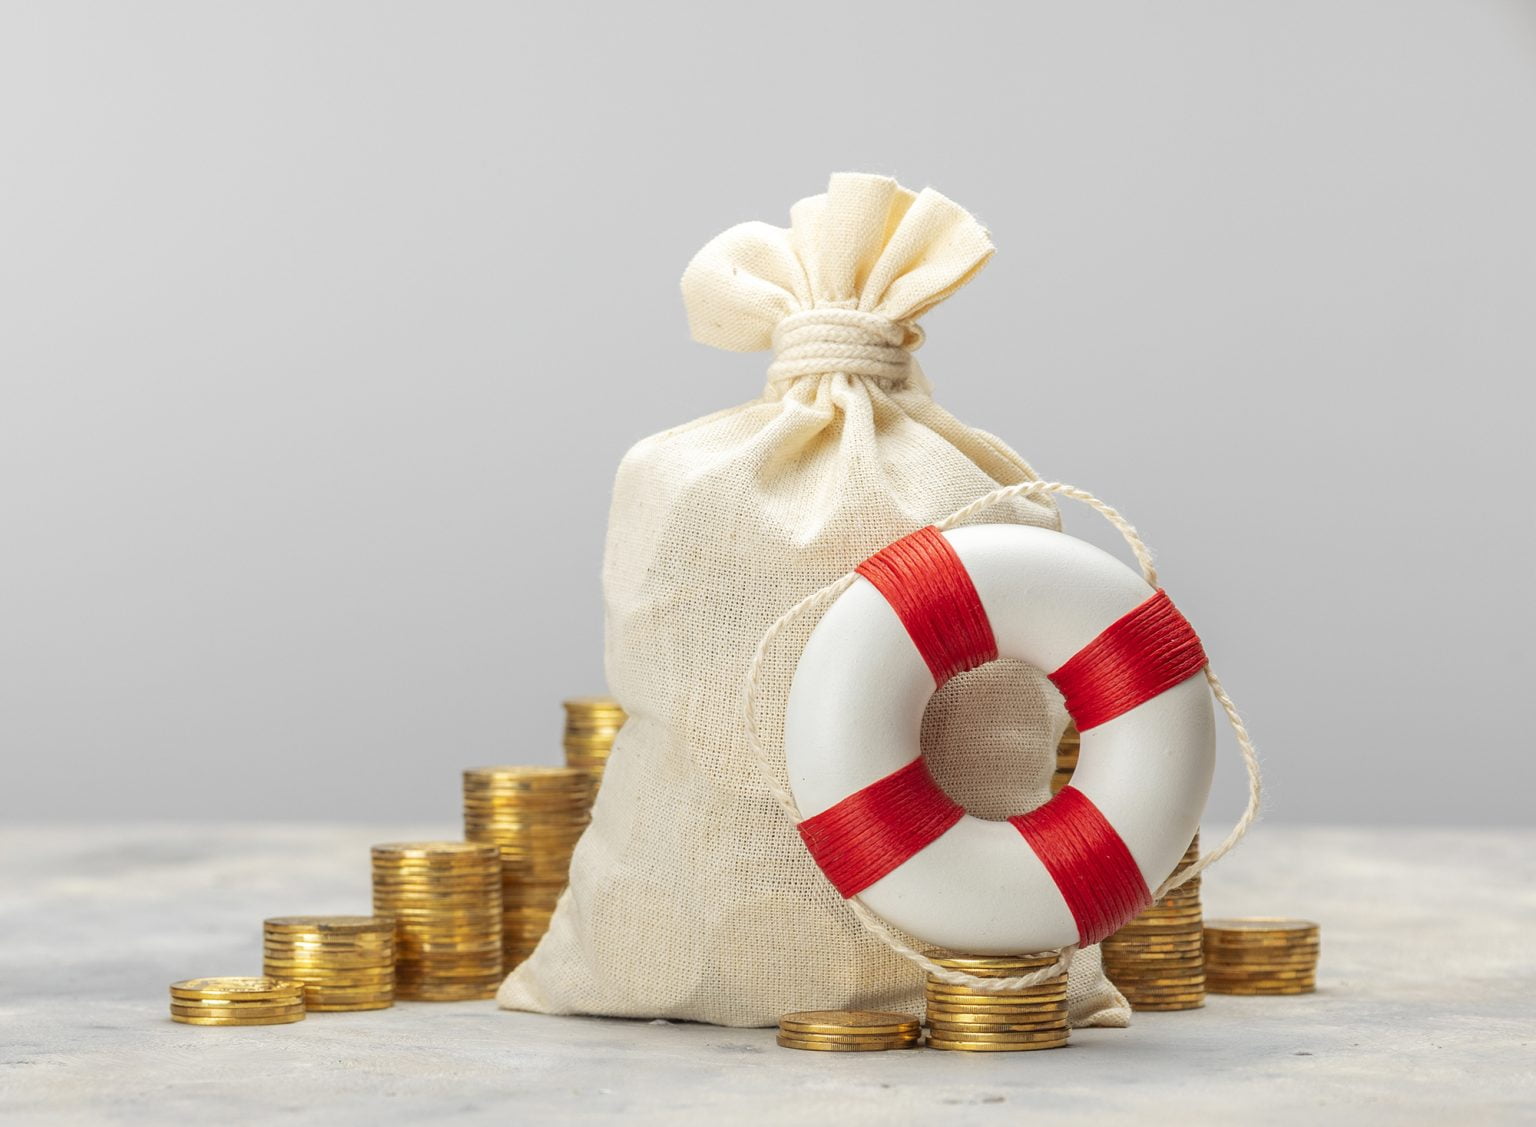 Money bag with coins and a lifebuoy on a gray background